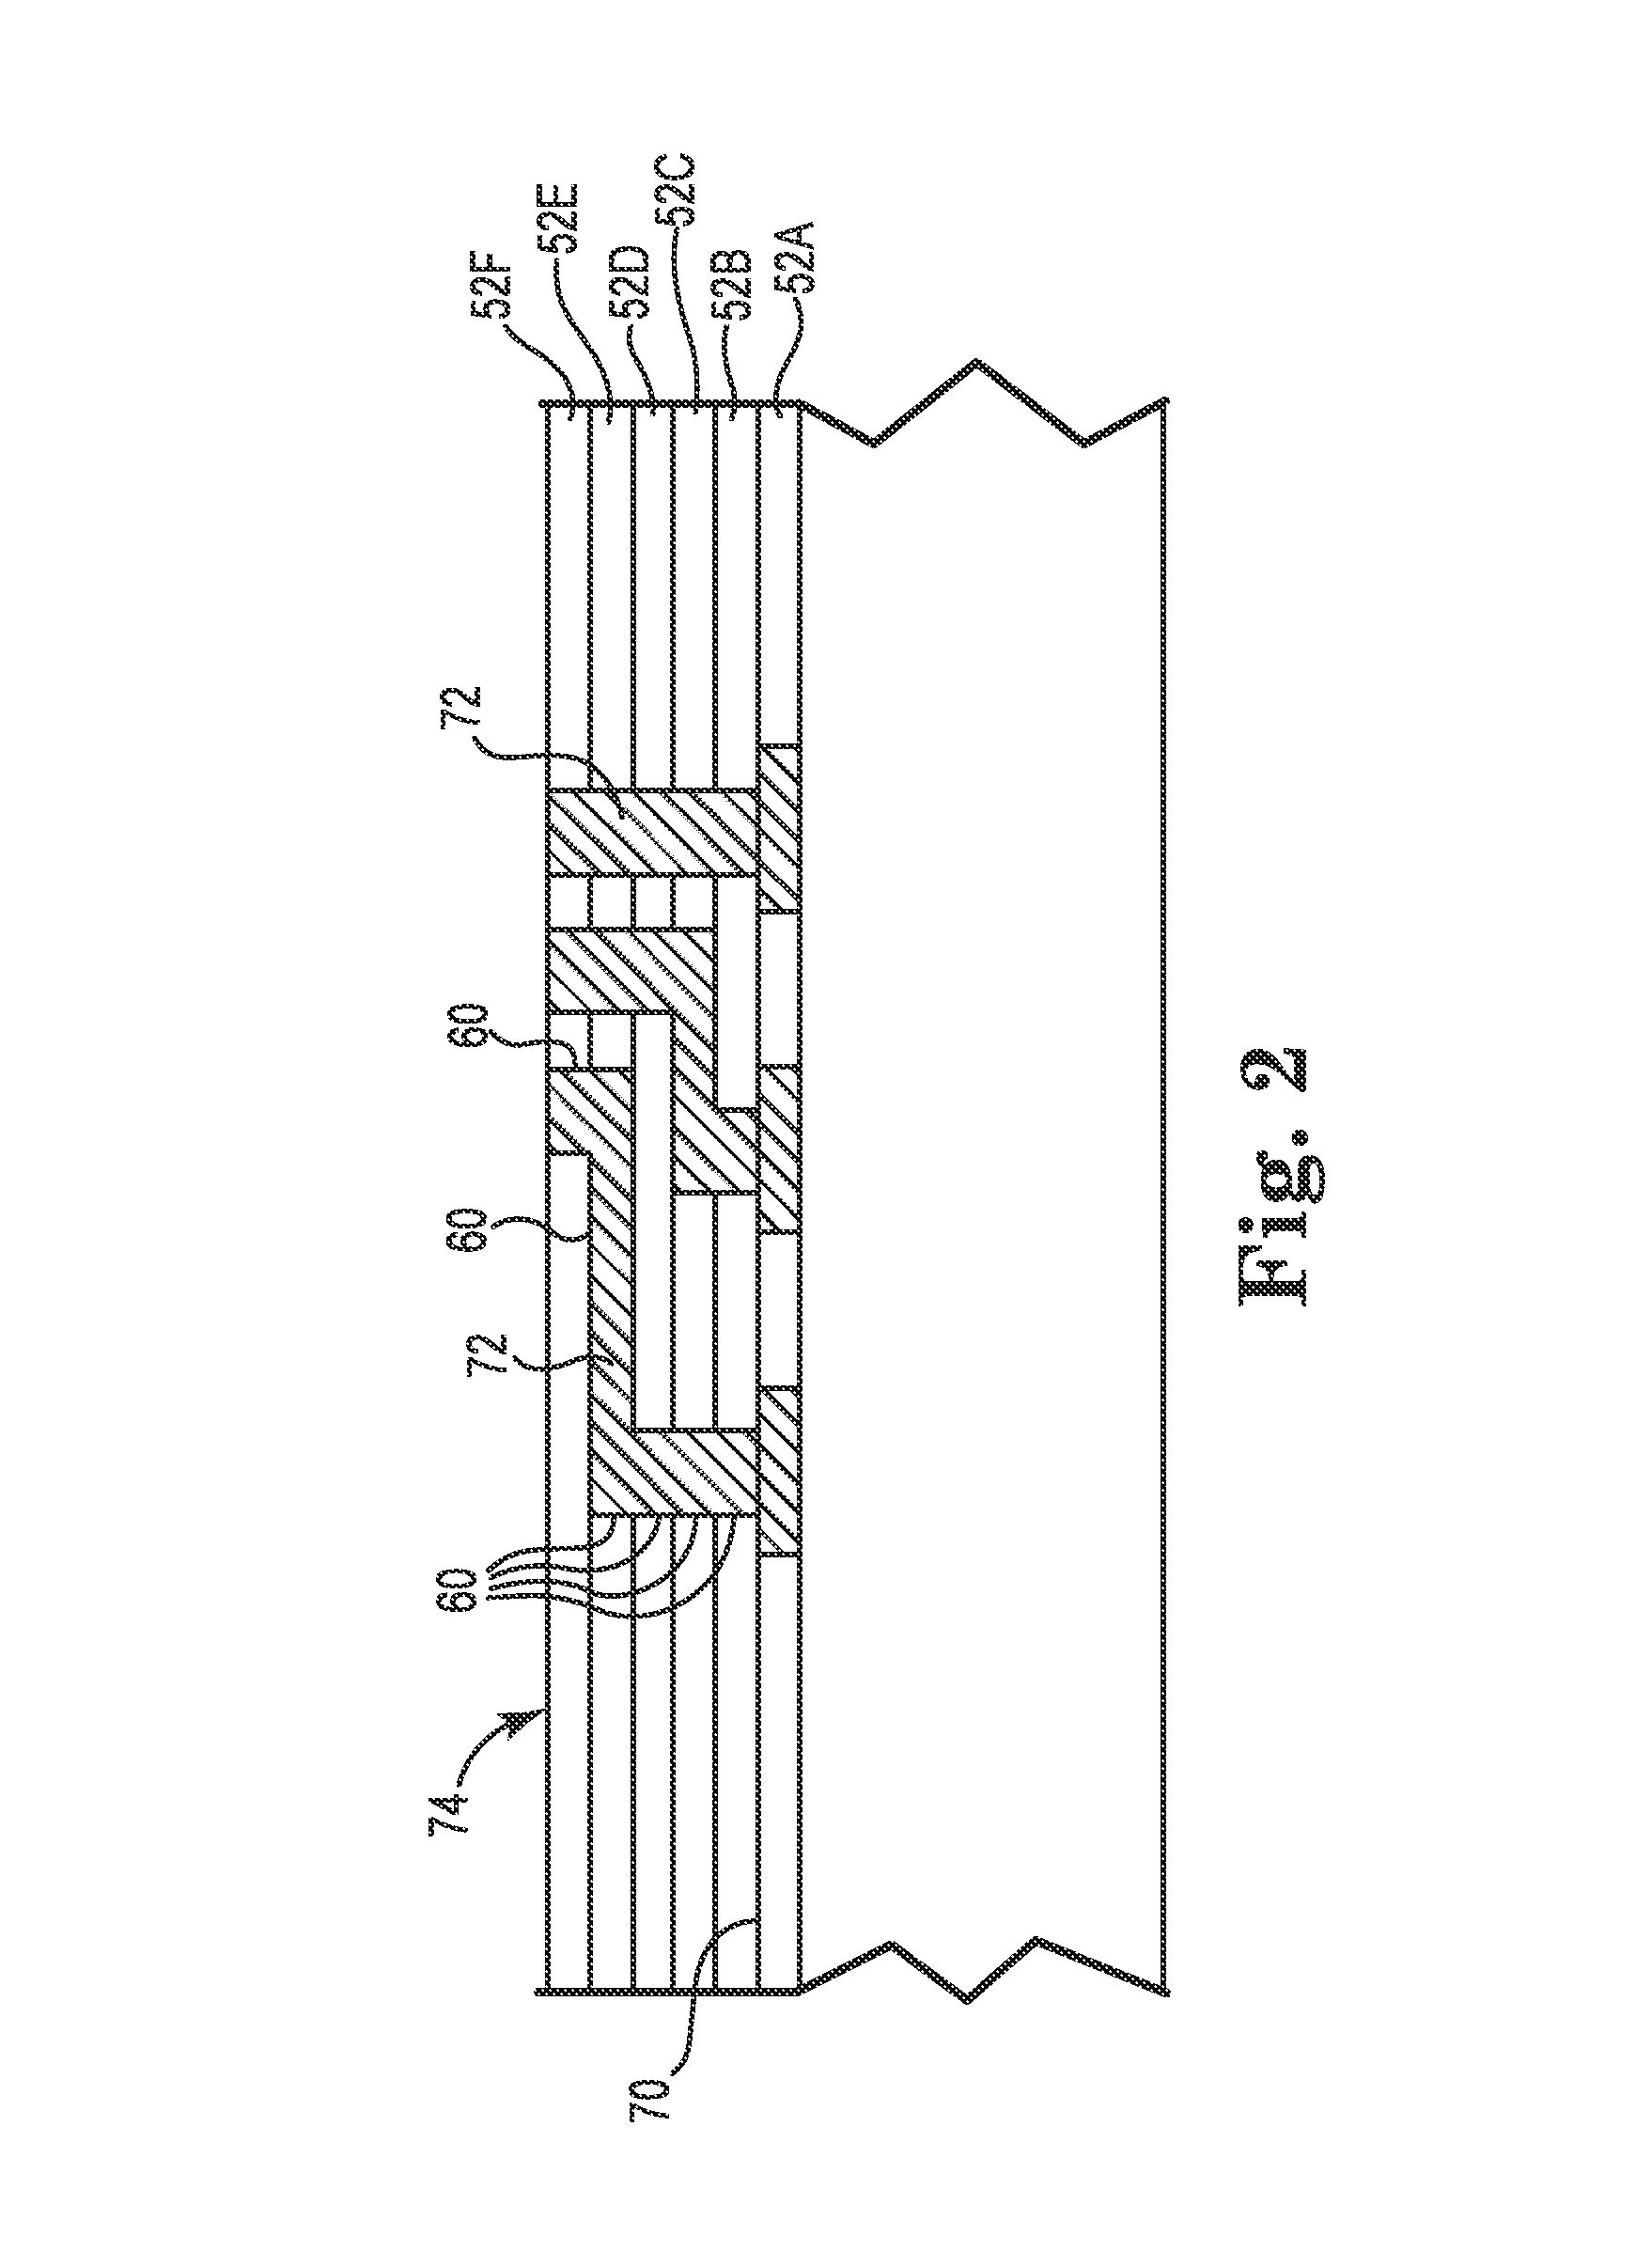 Method of making a compliant printed circuit peripheral lead semiconductor package